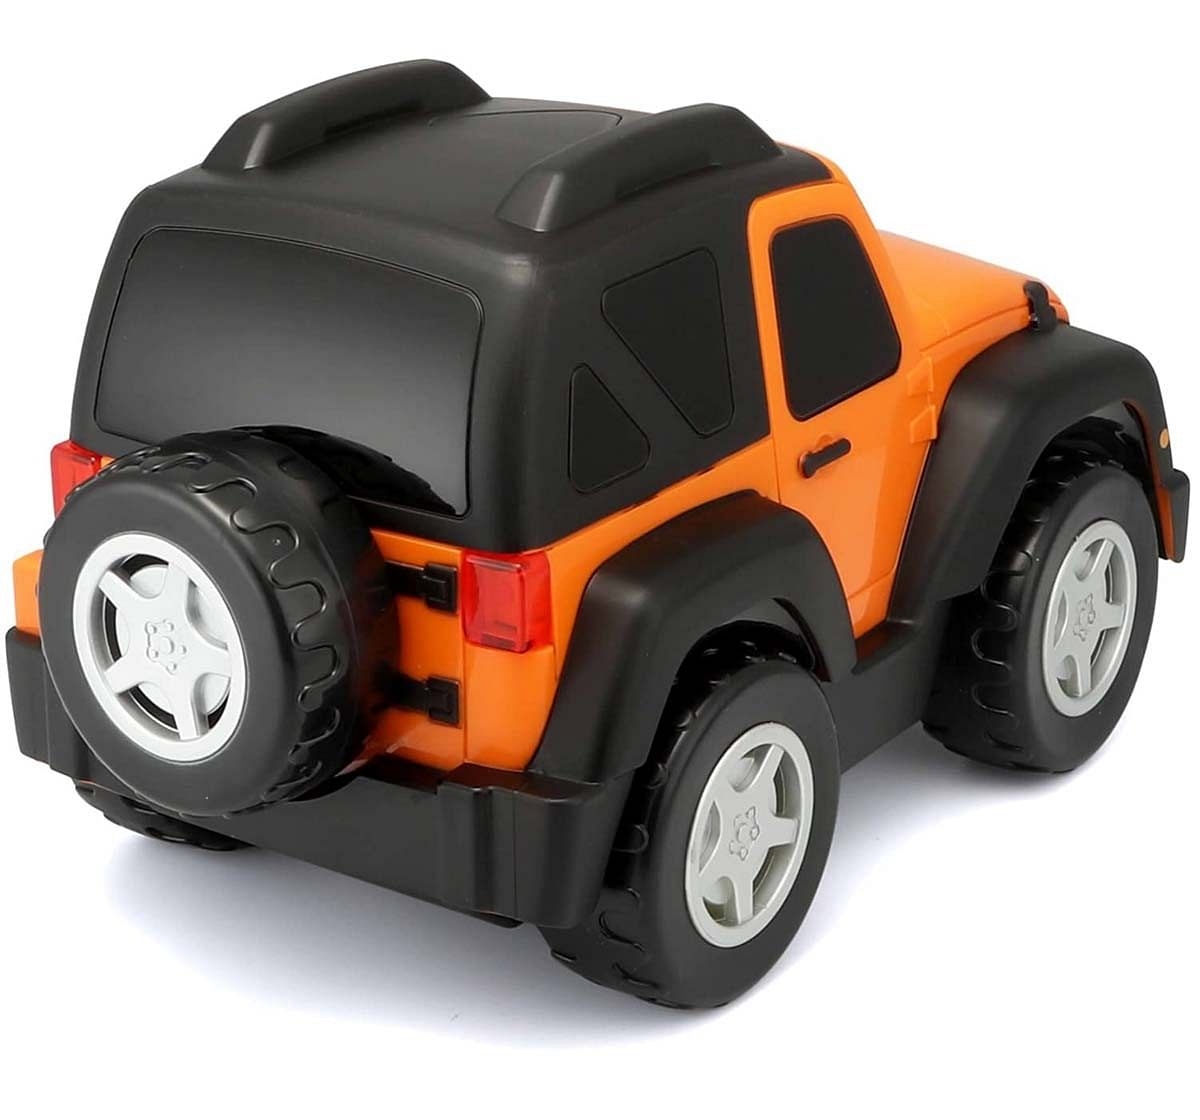 Bb Black Junior Jeep Wrangler Playset Activity Toys for Kids age 2Y+ 